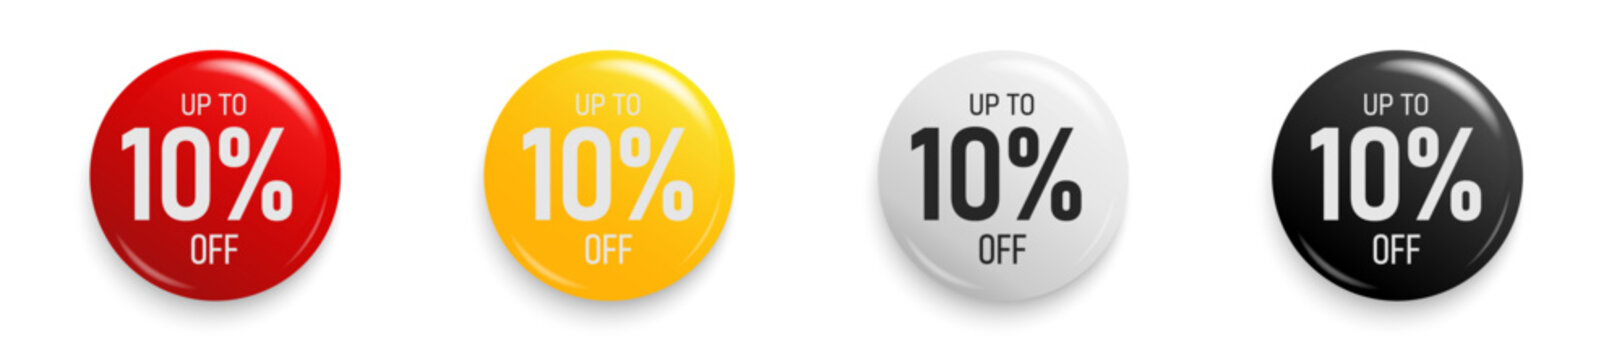 Up to 10 percent Discount. Button sticker mockup banner. Promotion sticker badge set for shopping marketing and advertisement clearance sale, special offer, Save 10 percent. Vector illustration.